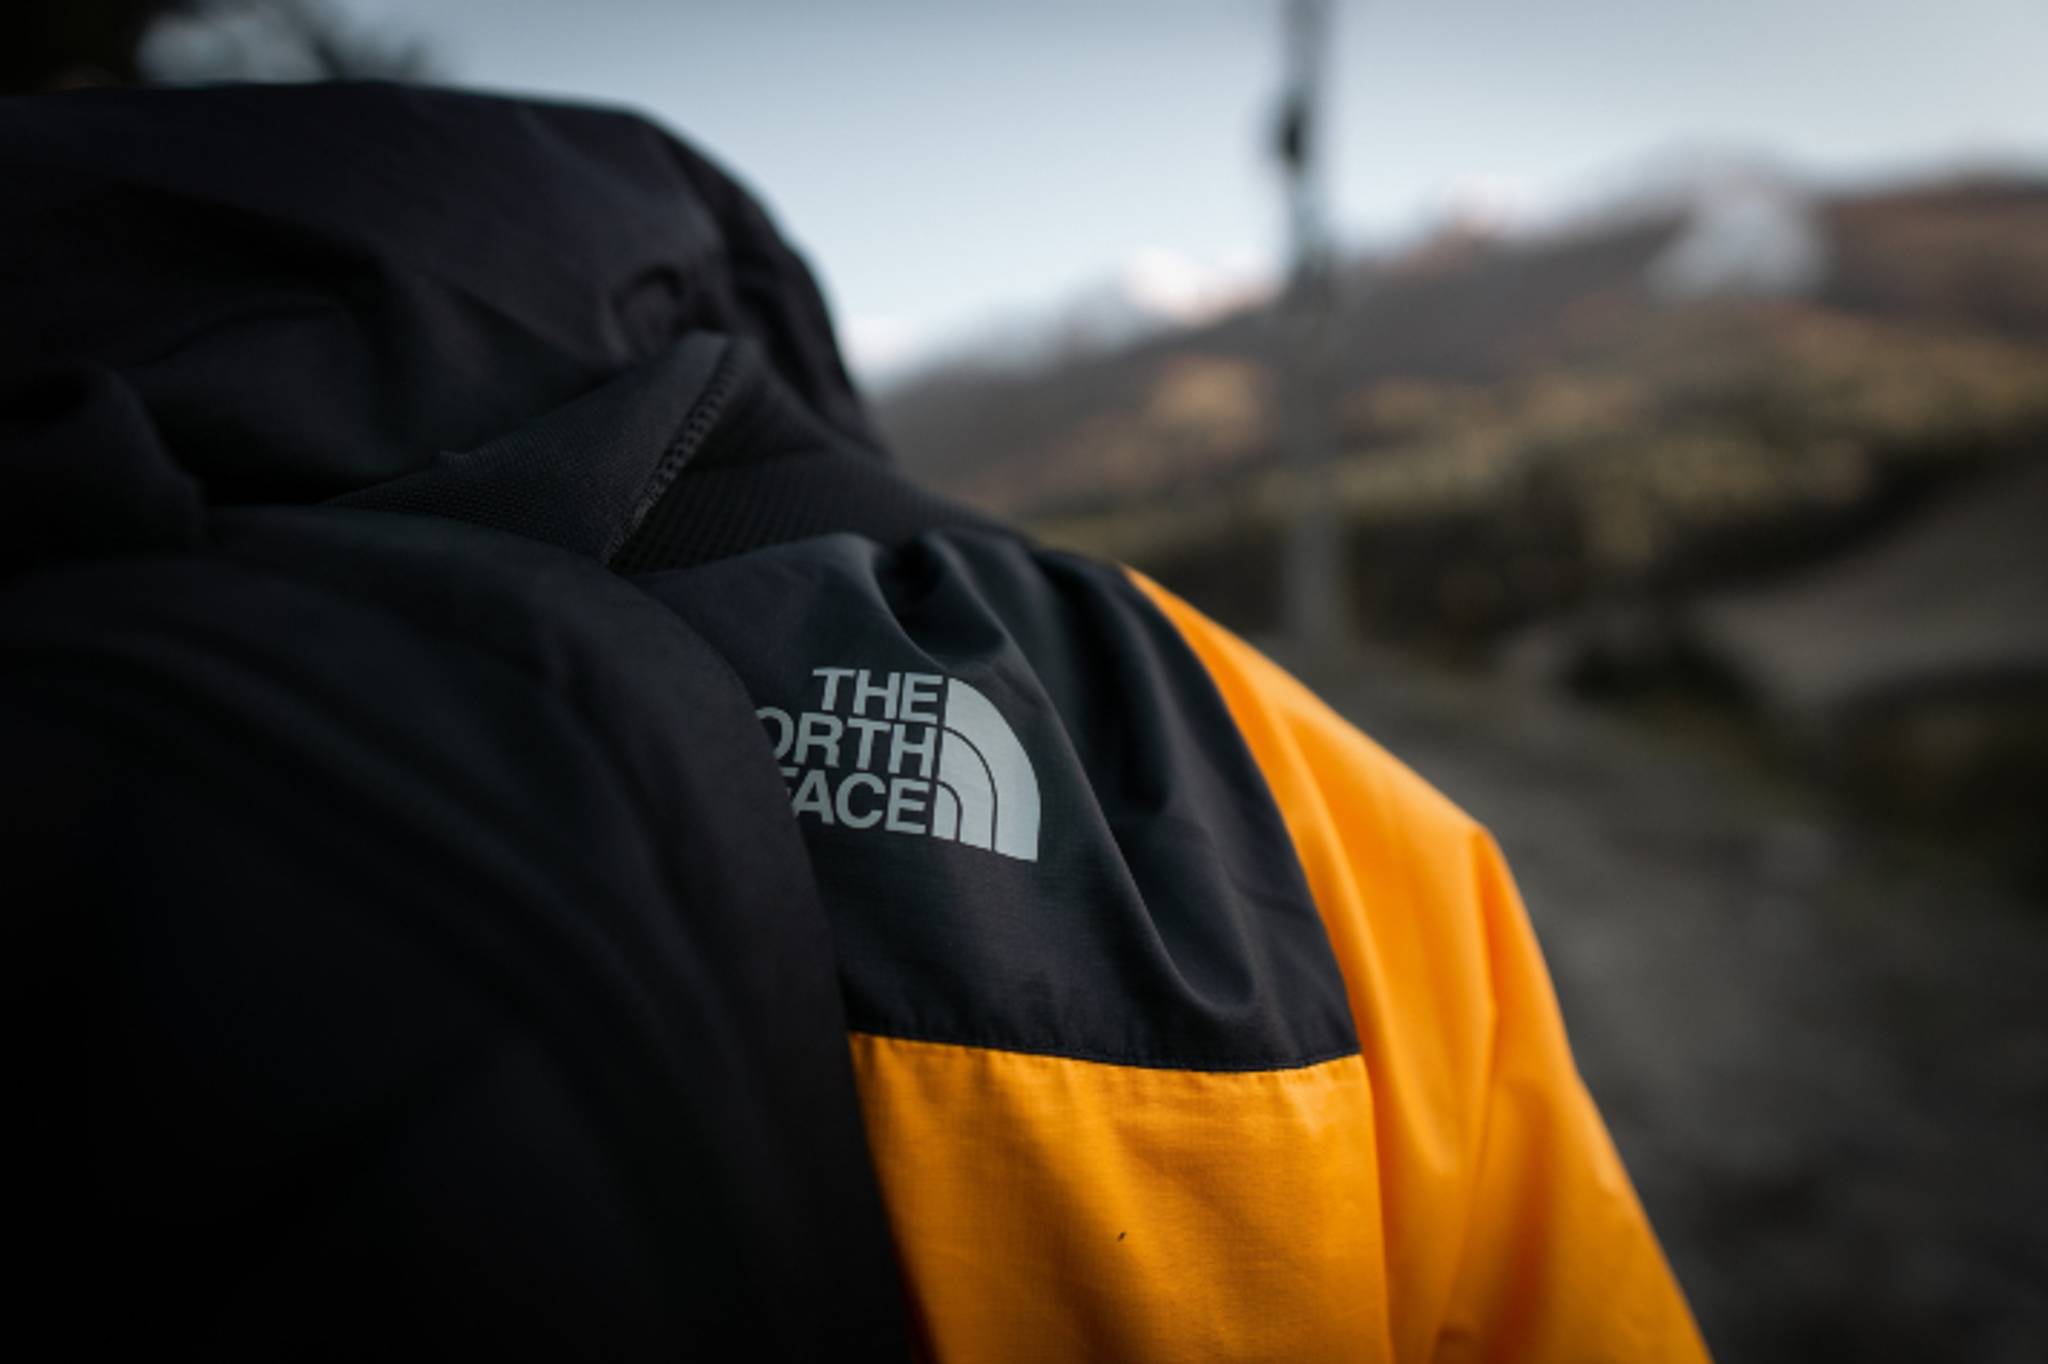 Oil and gas firm pokes holes in North Face’s eco stance